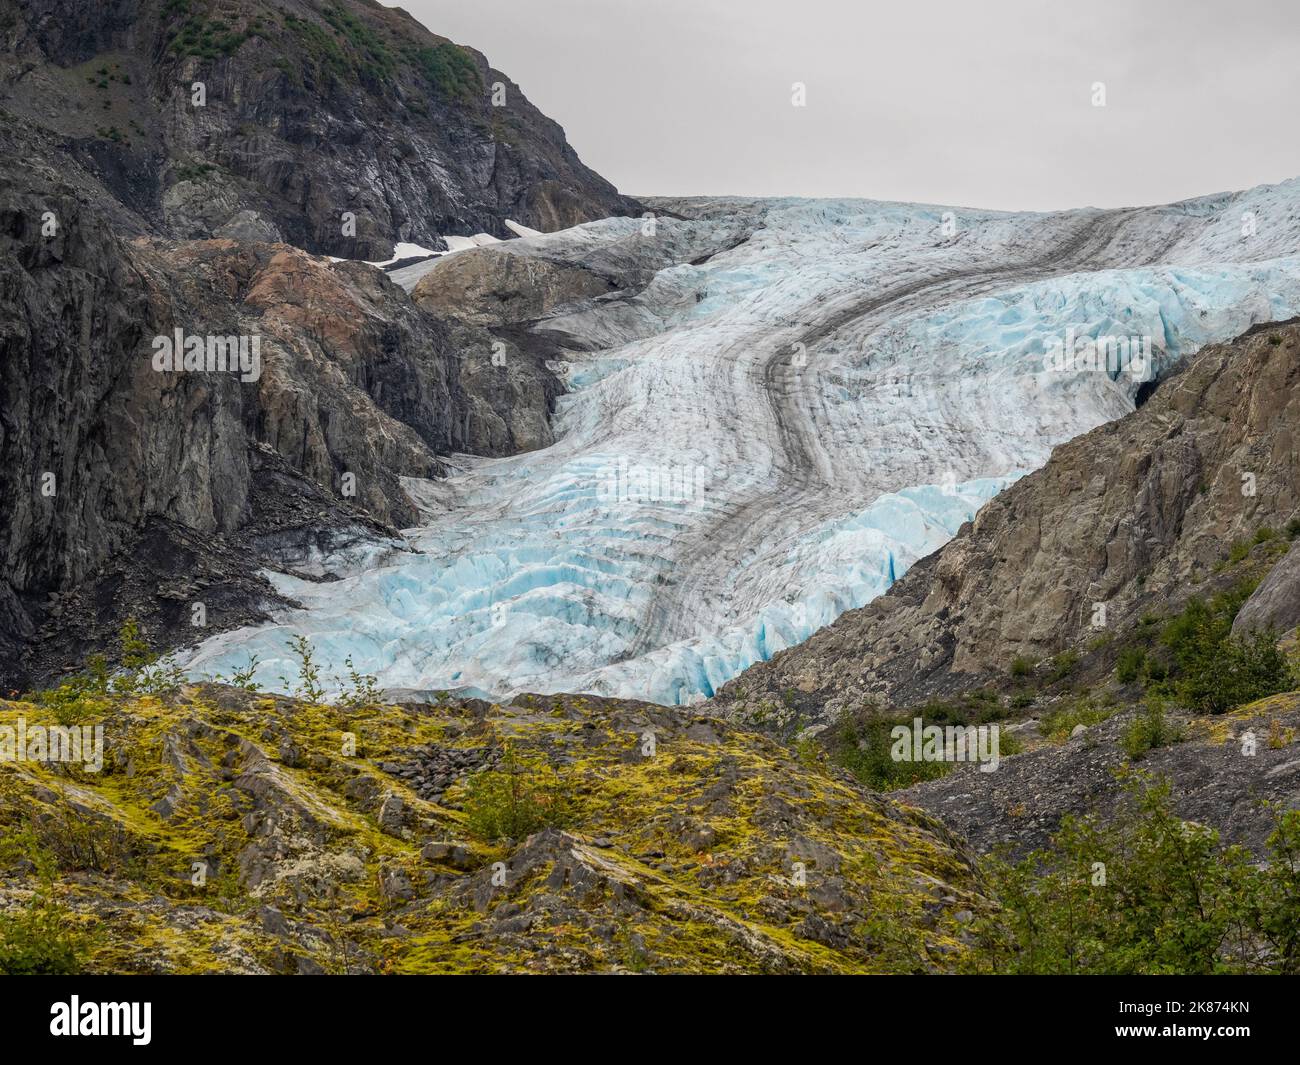 A view of the Exit Glacier, coming off the Harding Ice Field, Kenai Fjords National Park, Alaska, United States of America, North America Stock Photo